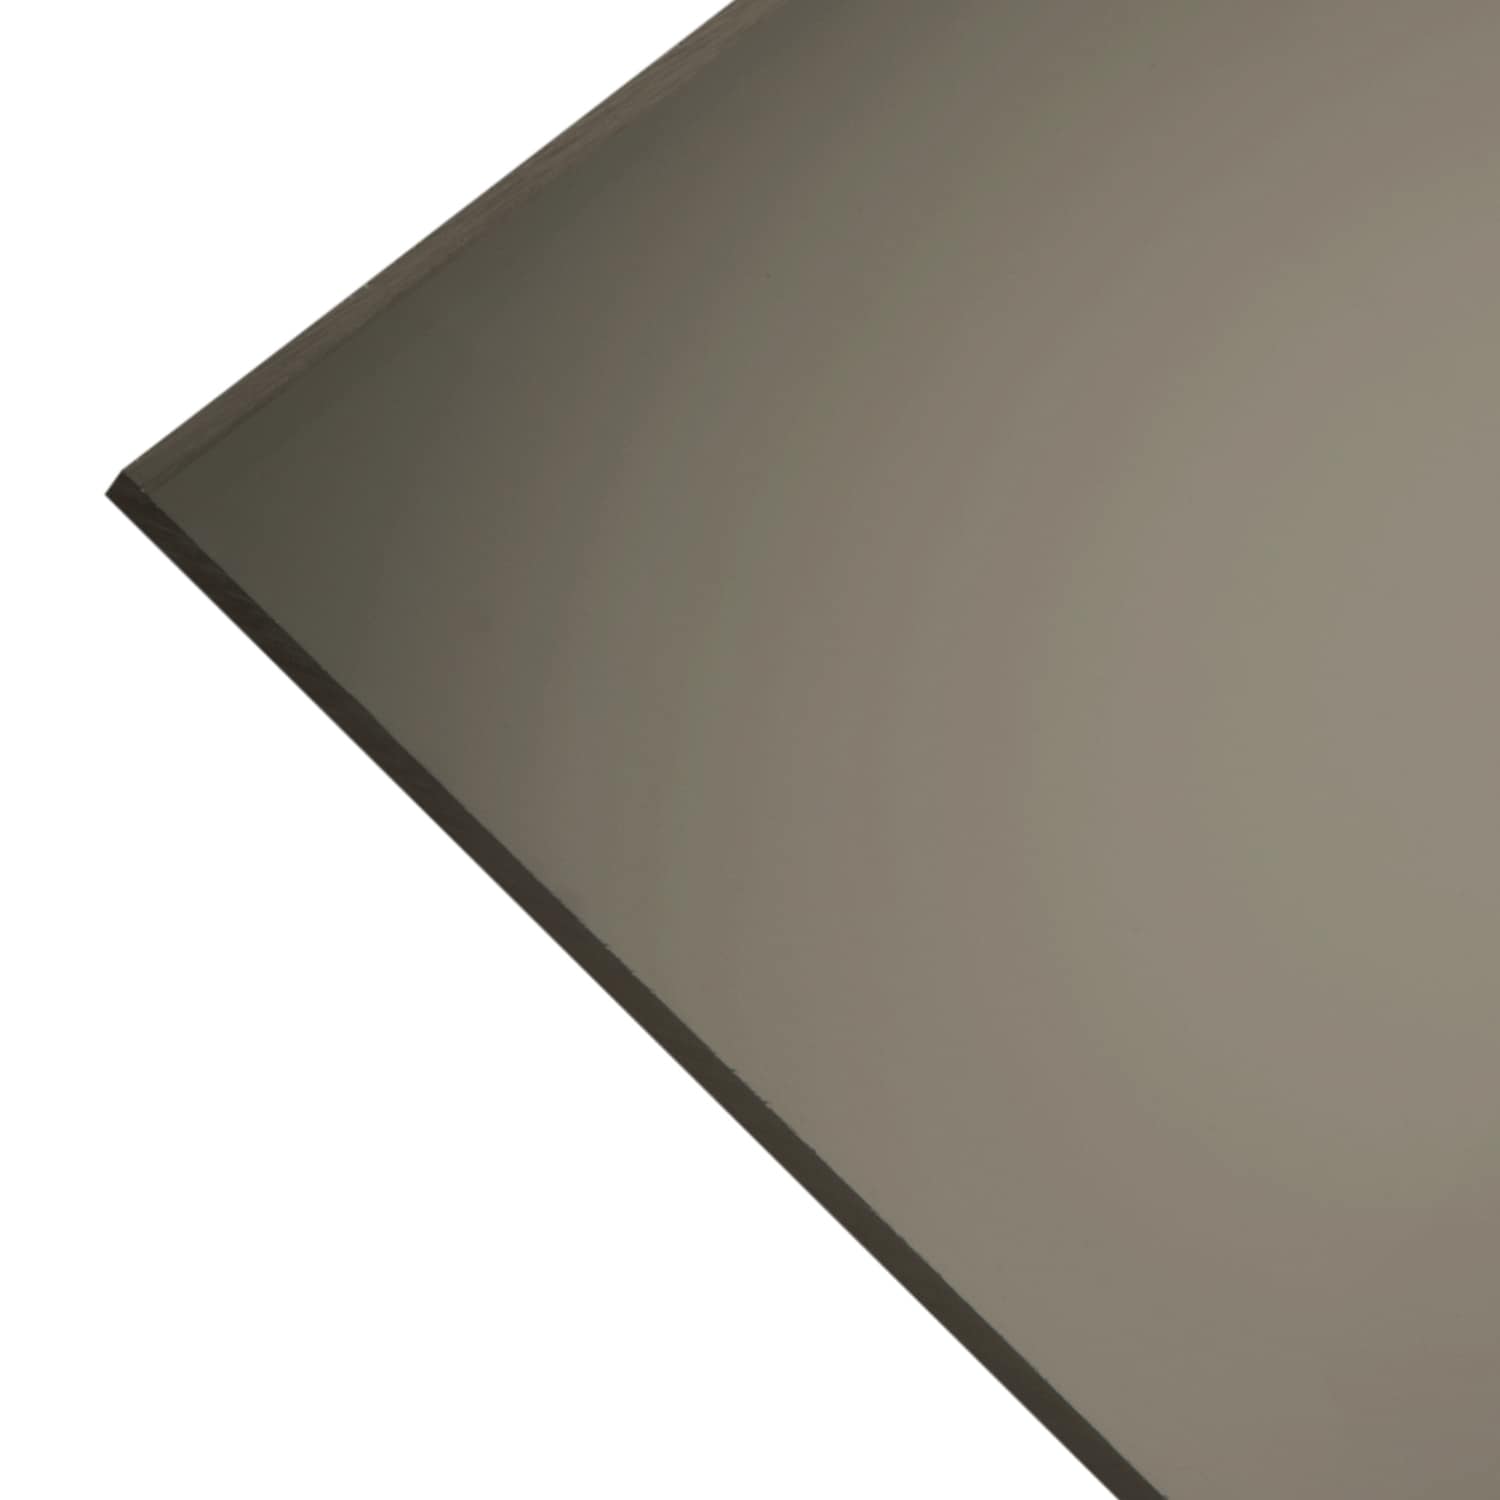 36 in. x 36 in. x 1/8 in. Thick Acrylic Mirror Silver Sheet